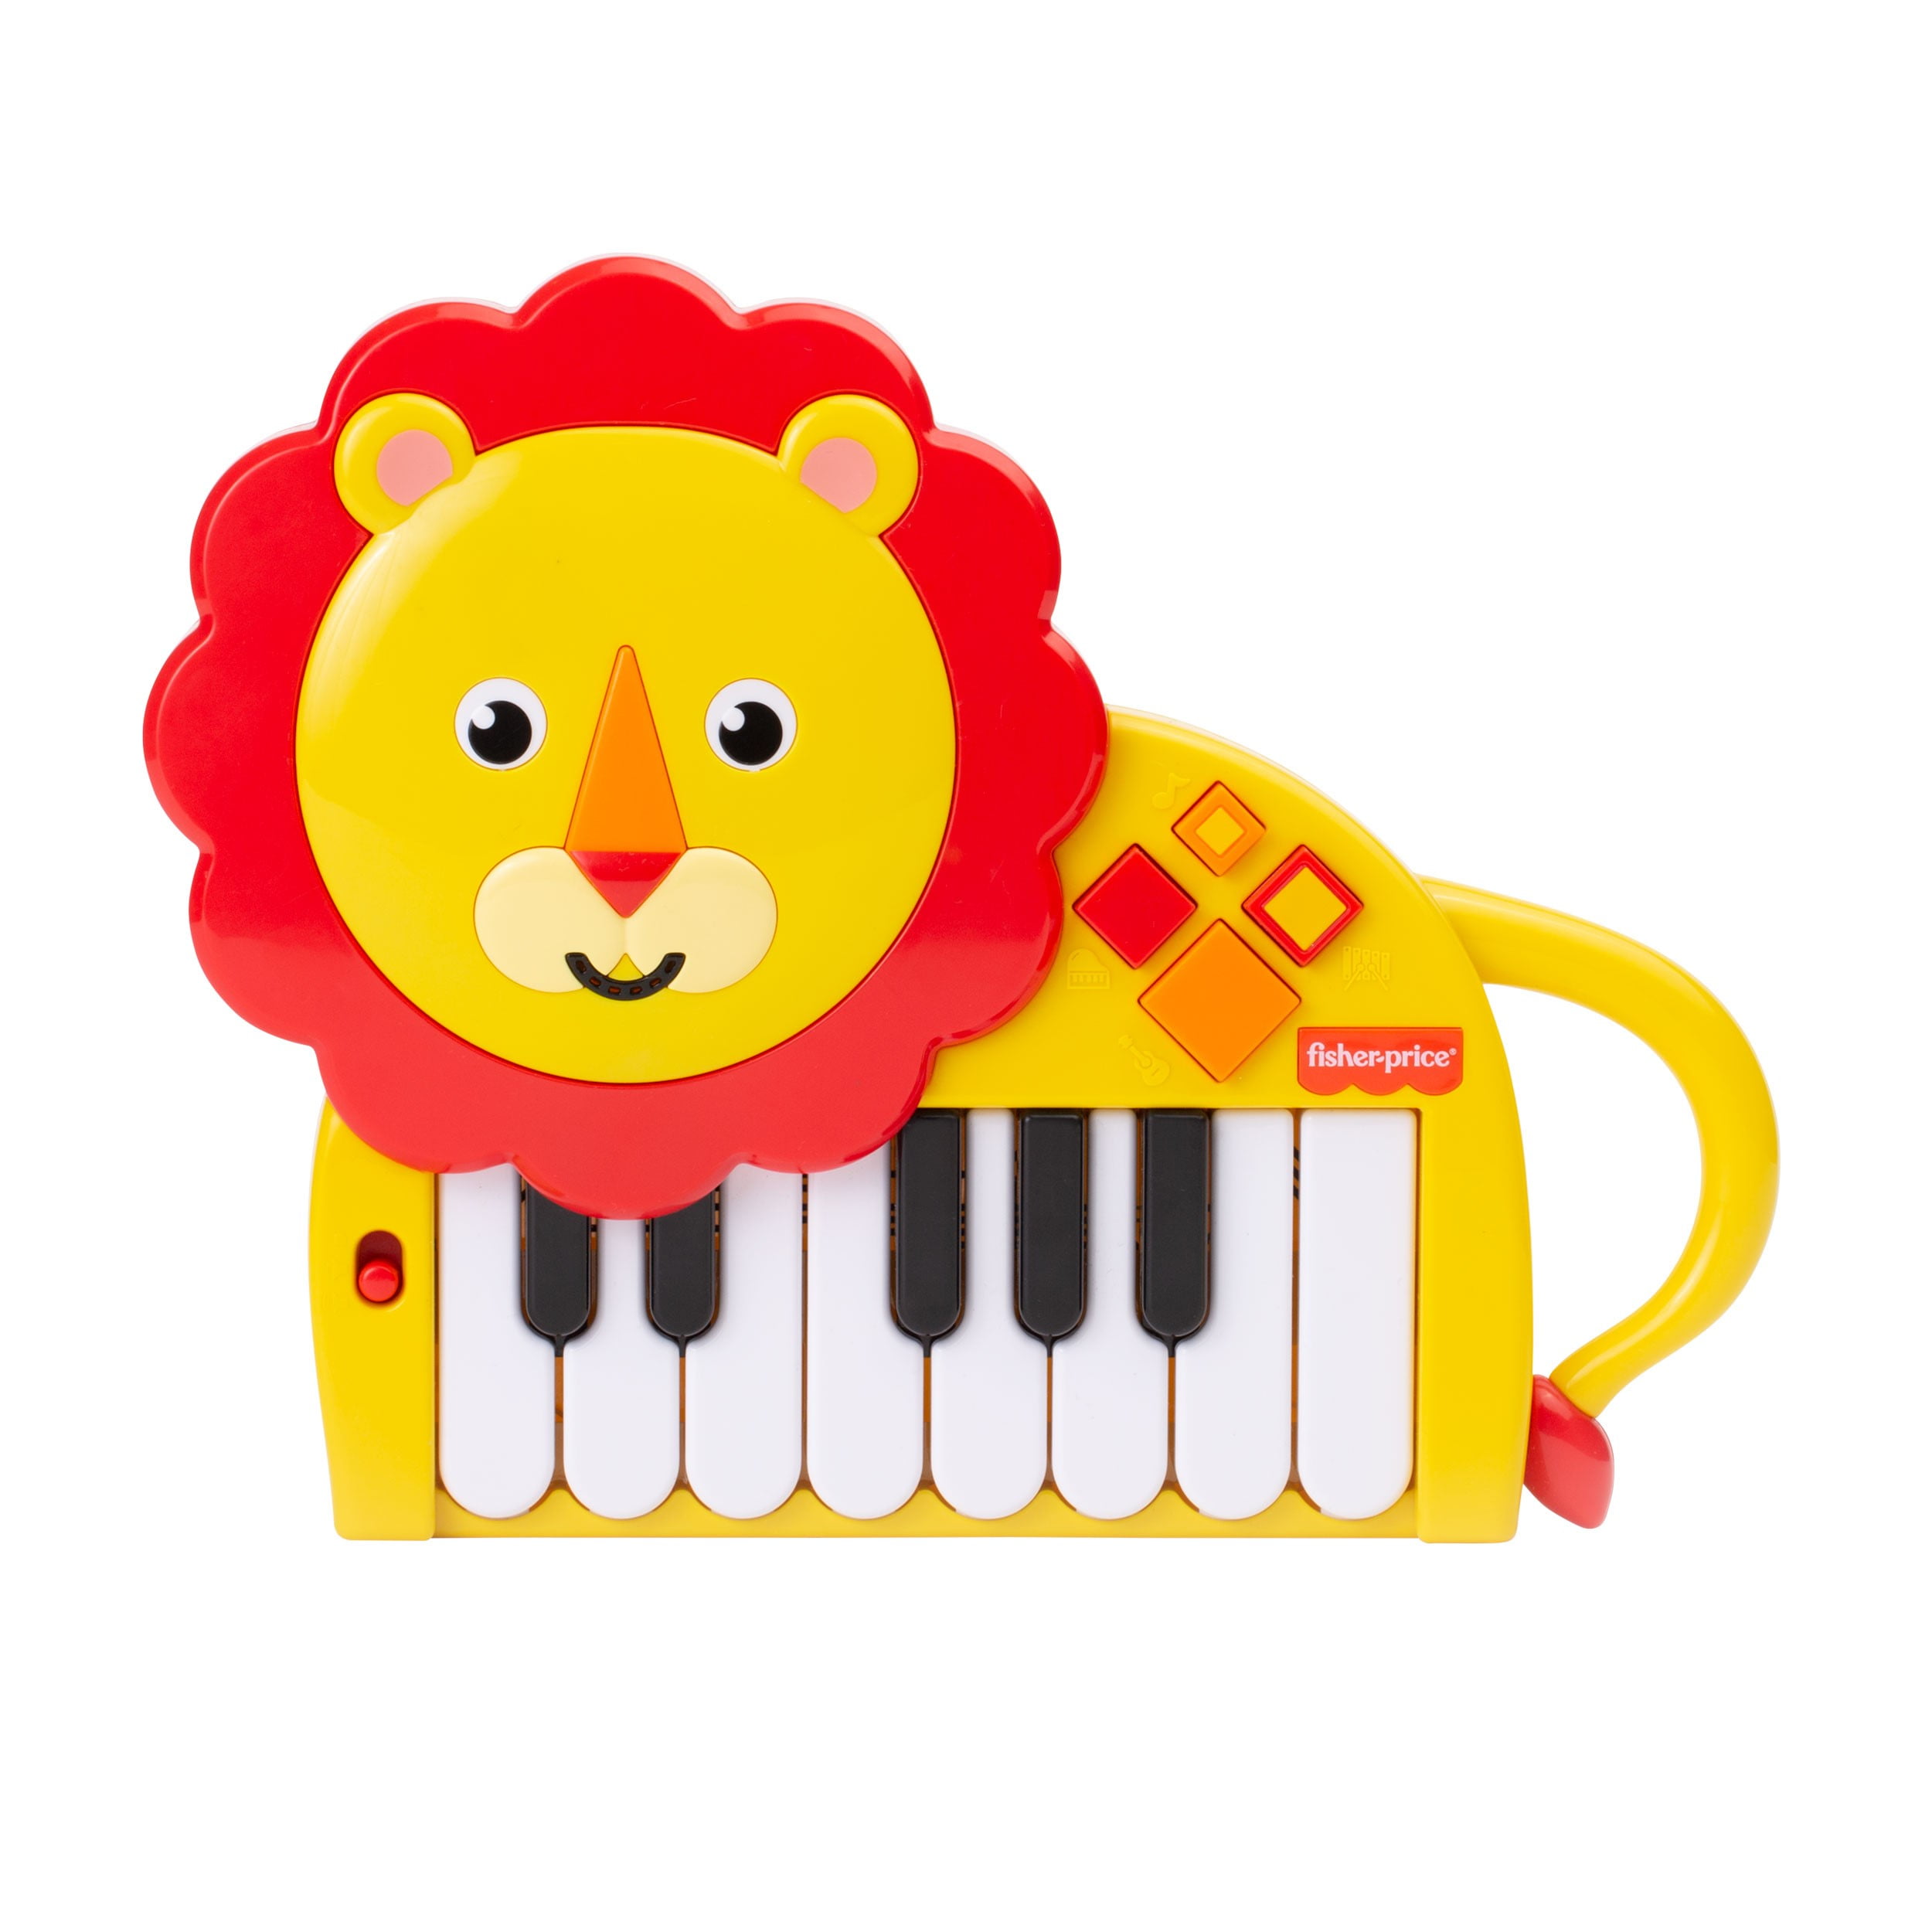 Musical Fun Electronic Piano Keyboard For Kids With Record & Playback Yellow 